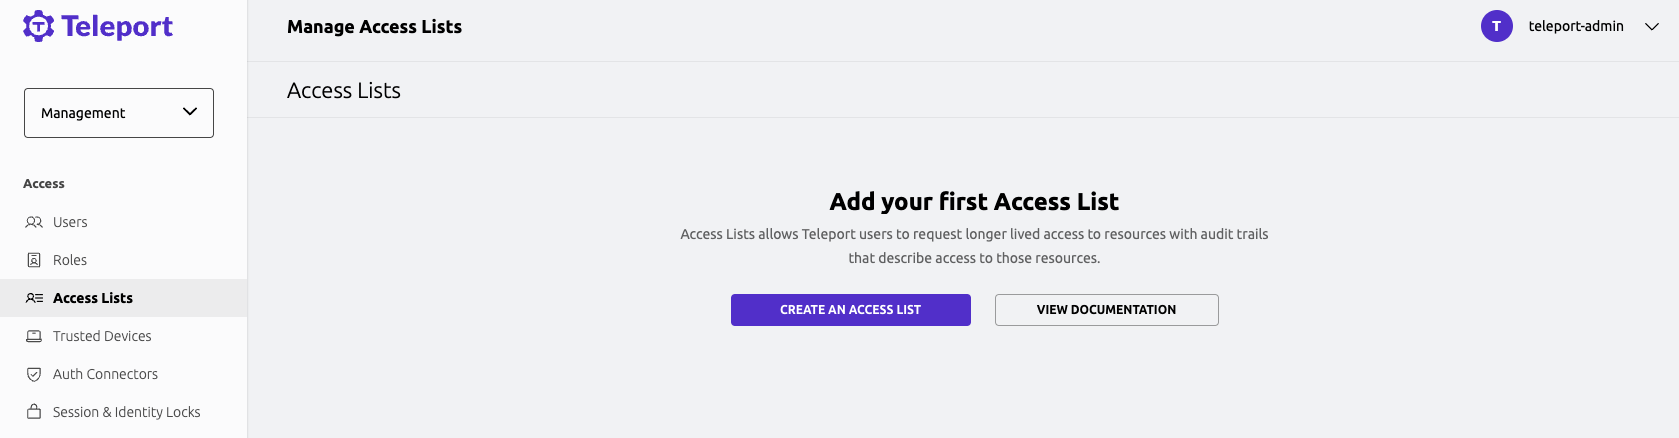 Navigate to create new Access List